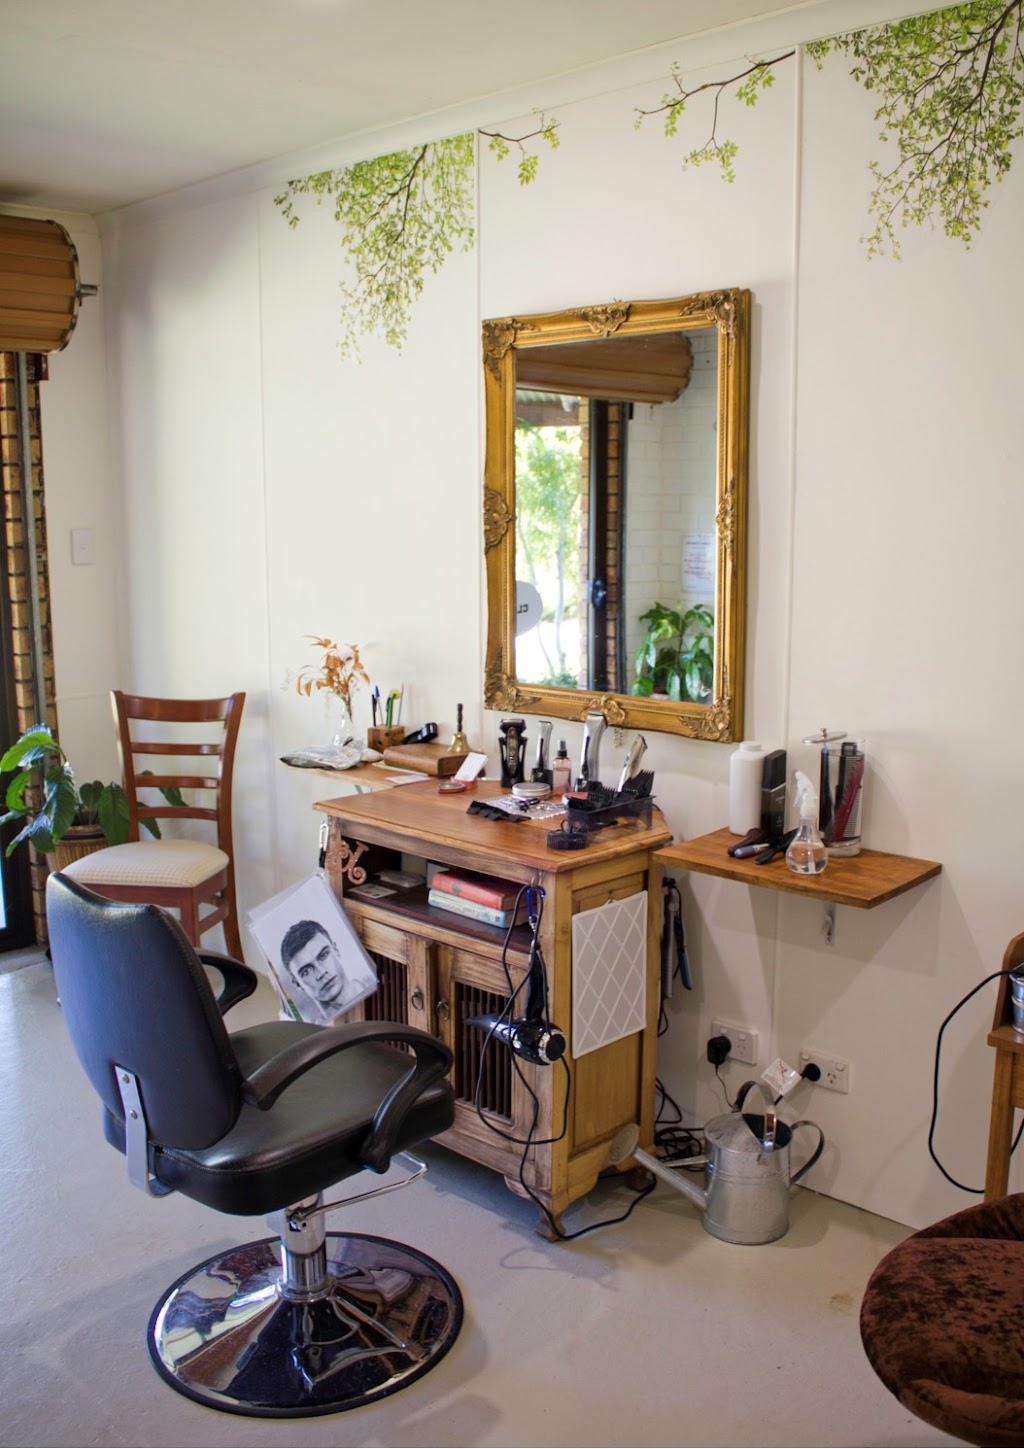 Country Cuts Hairdresser | hair care | 2 King St, Perth TAS 7300, Australia | 0439096213 OR +61 439 096 213